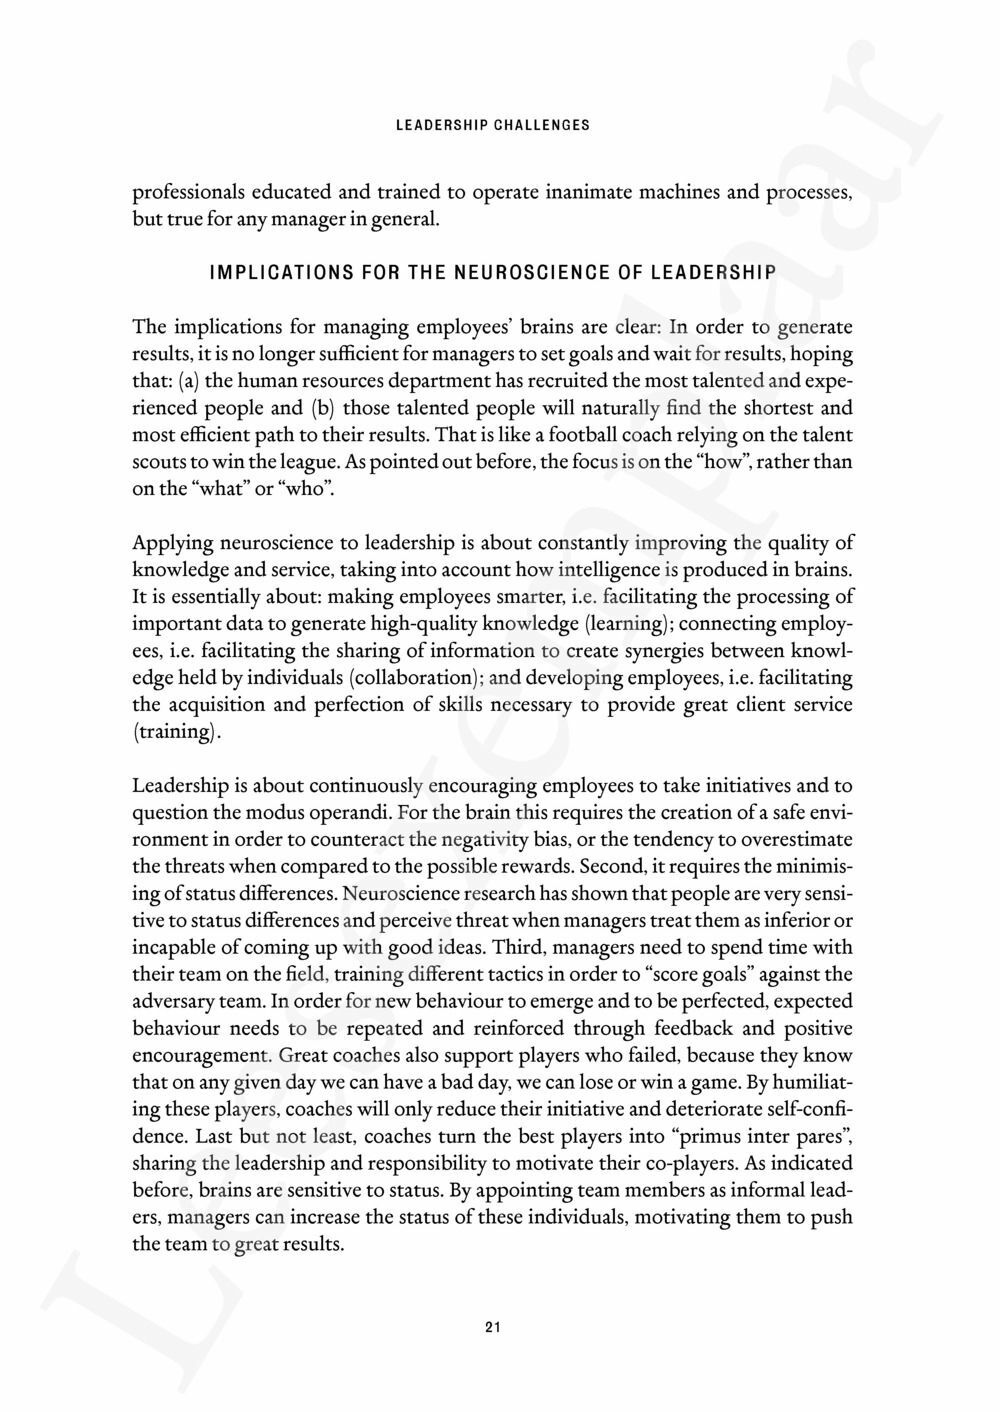 Preview: Paradoxes of Leadership